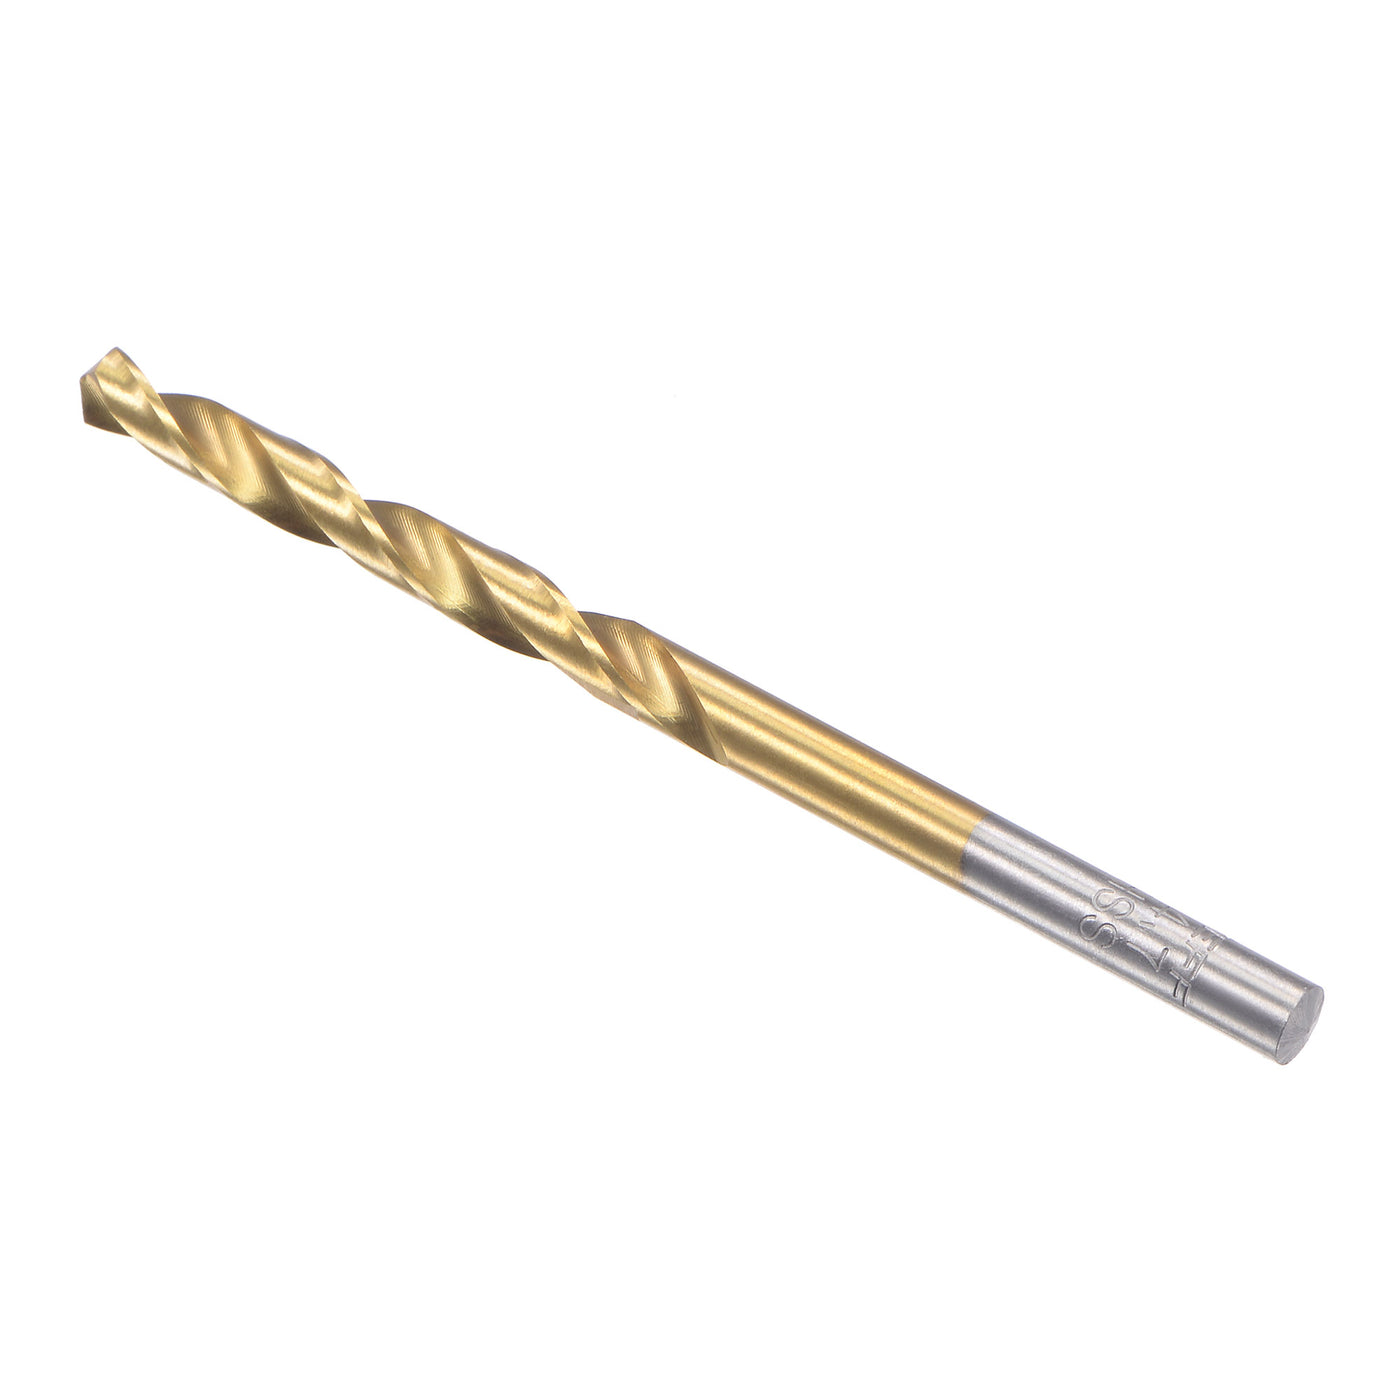 uxcell Uxcell High Speed Steel Twist Drill Bit 4.7mm Fully Ground Titanium Coated 2 Pcs